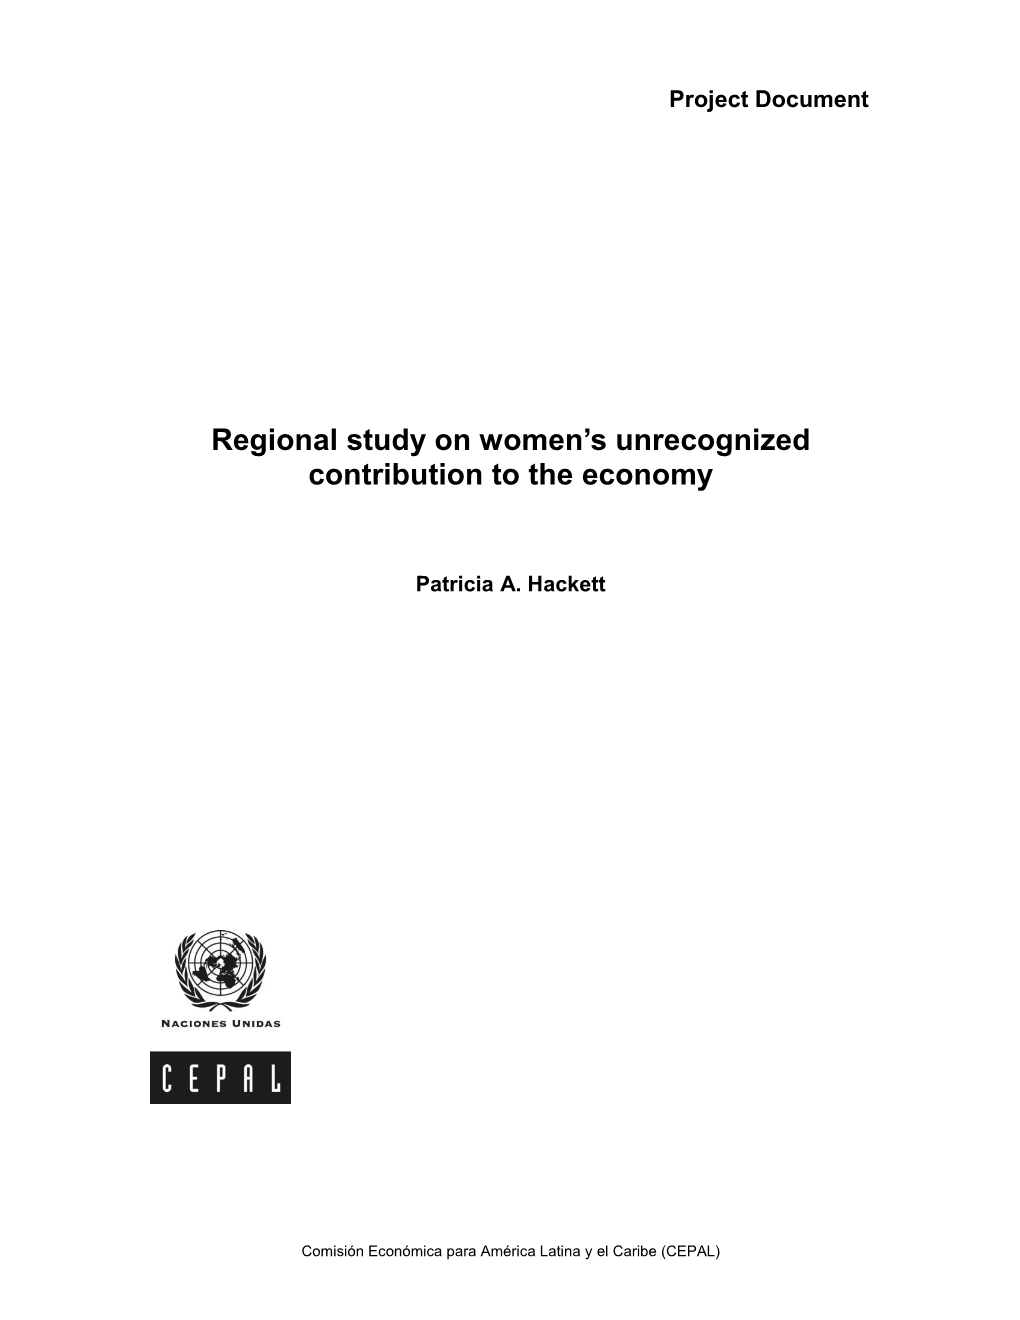 Regional Study on Women's Unrecognized Contribution to the Economy